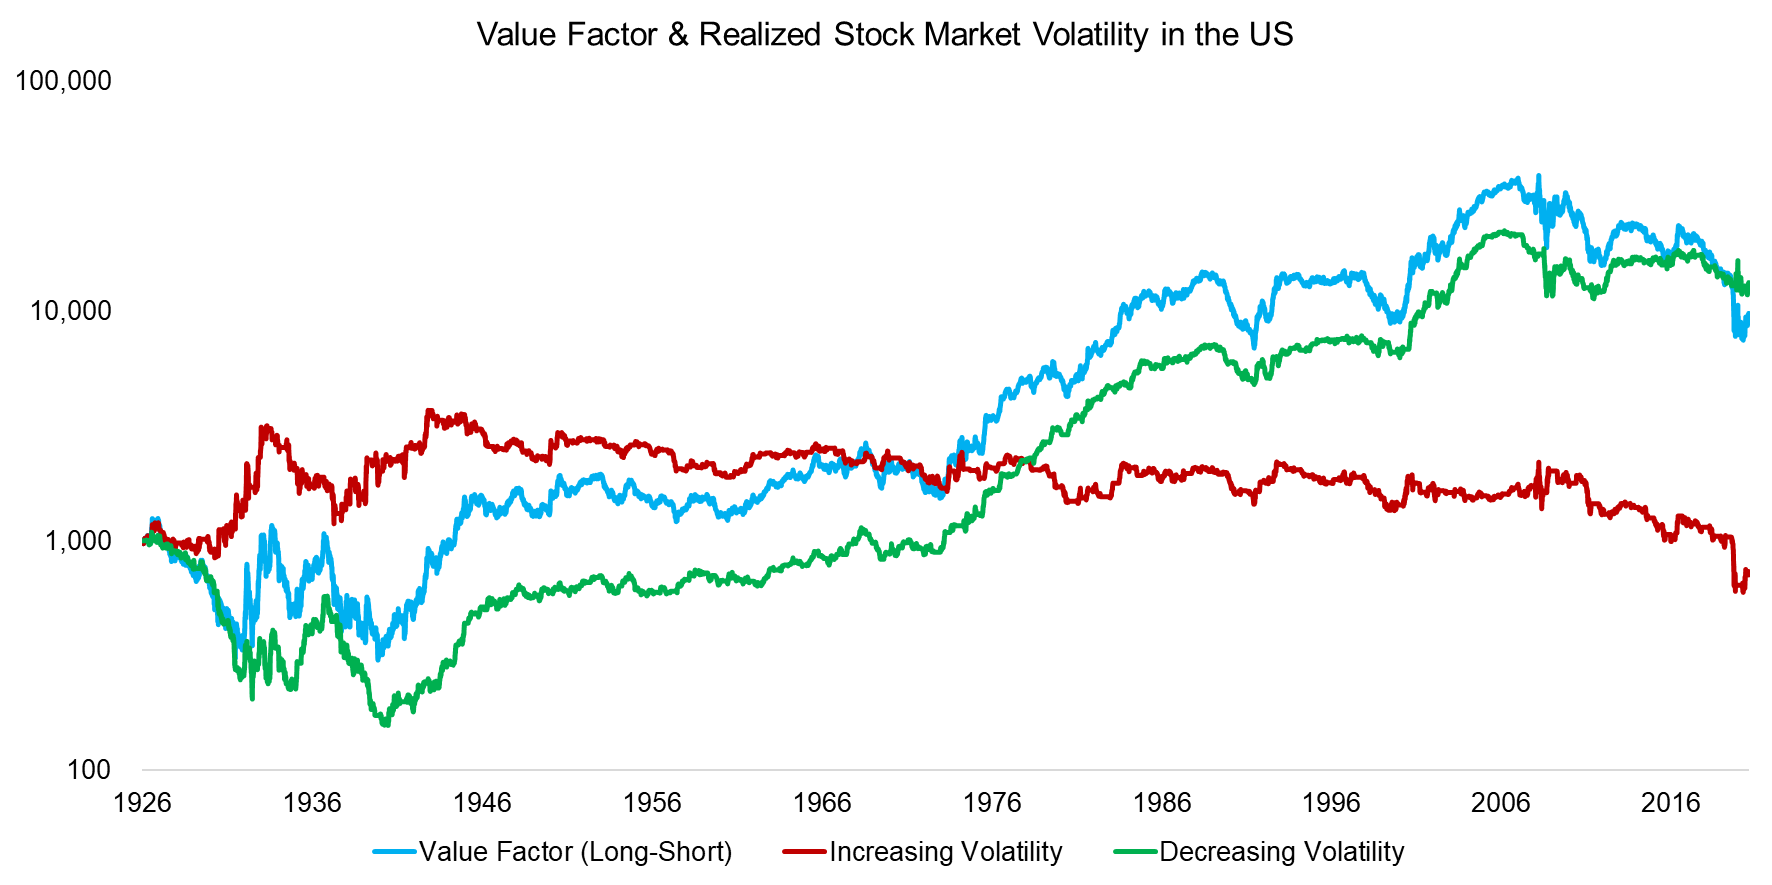 Value Factor & Realized Stock Market Volatility in the US